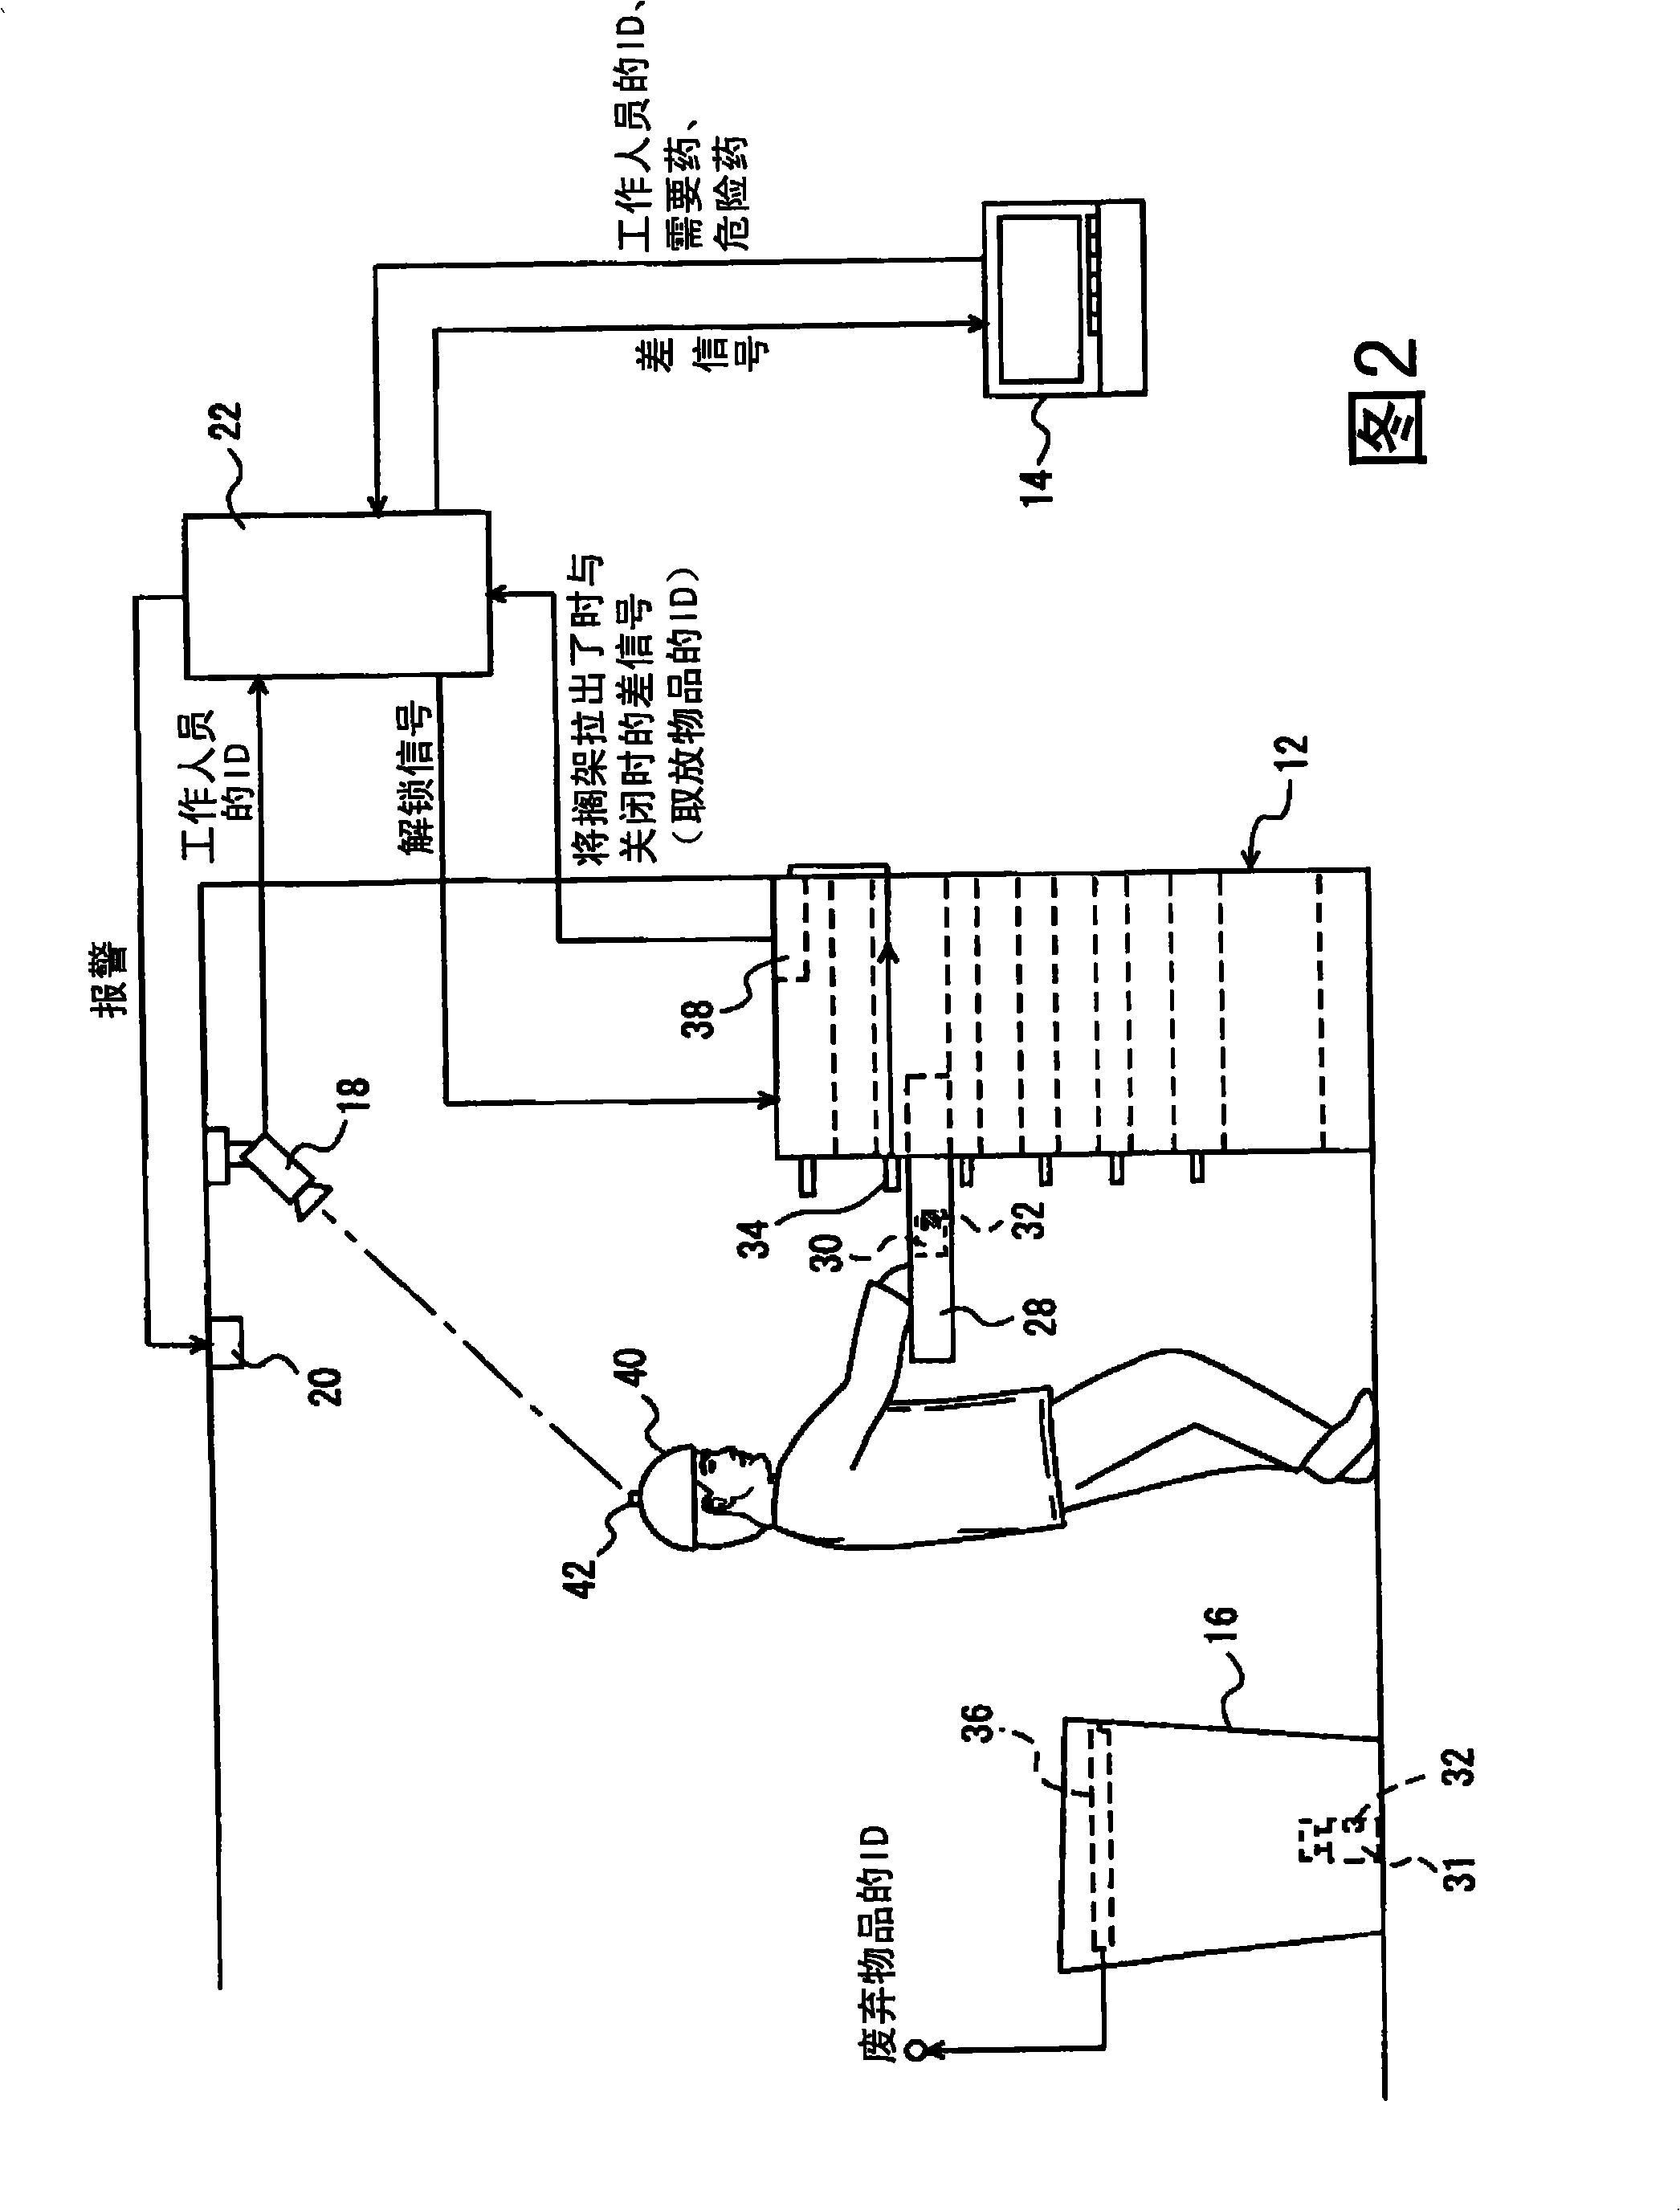 Storage system and stored article ID management method